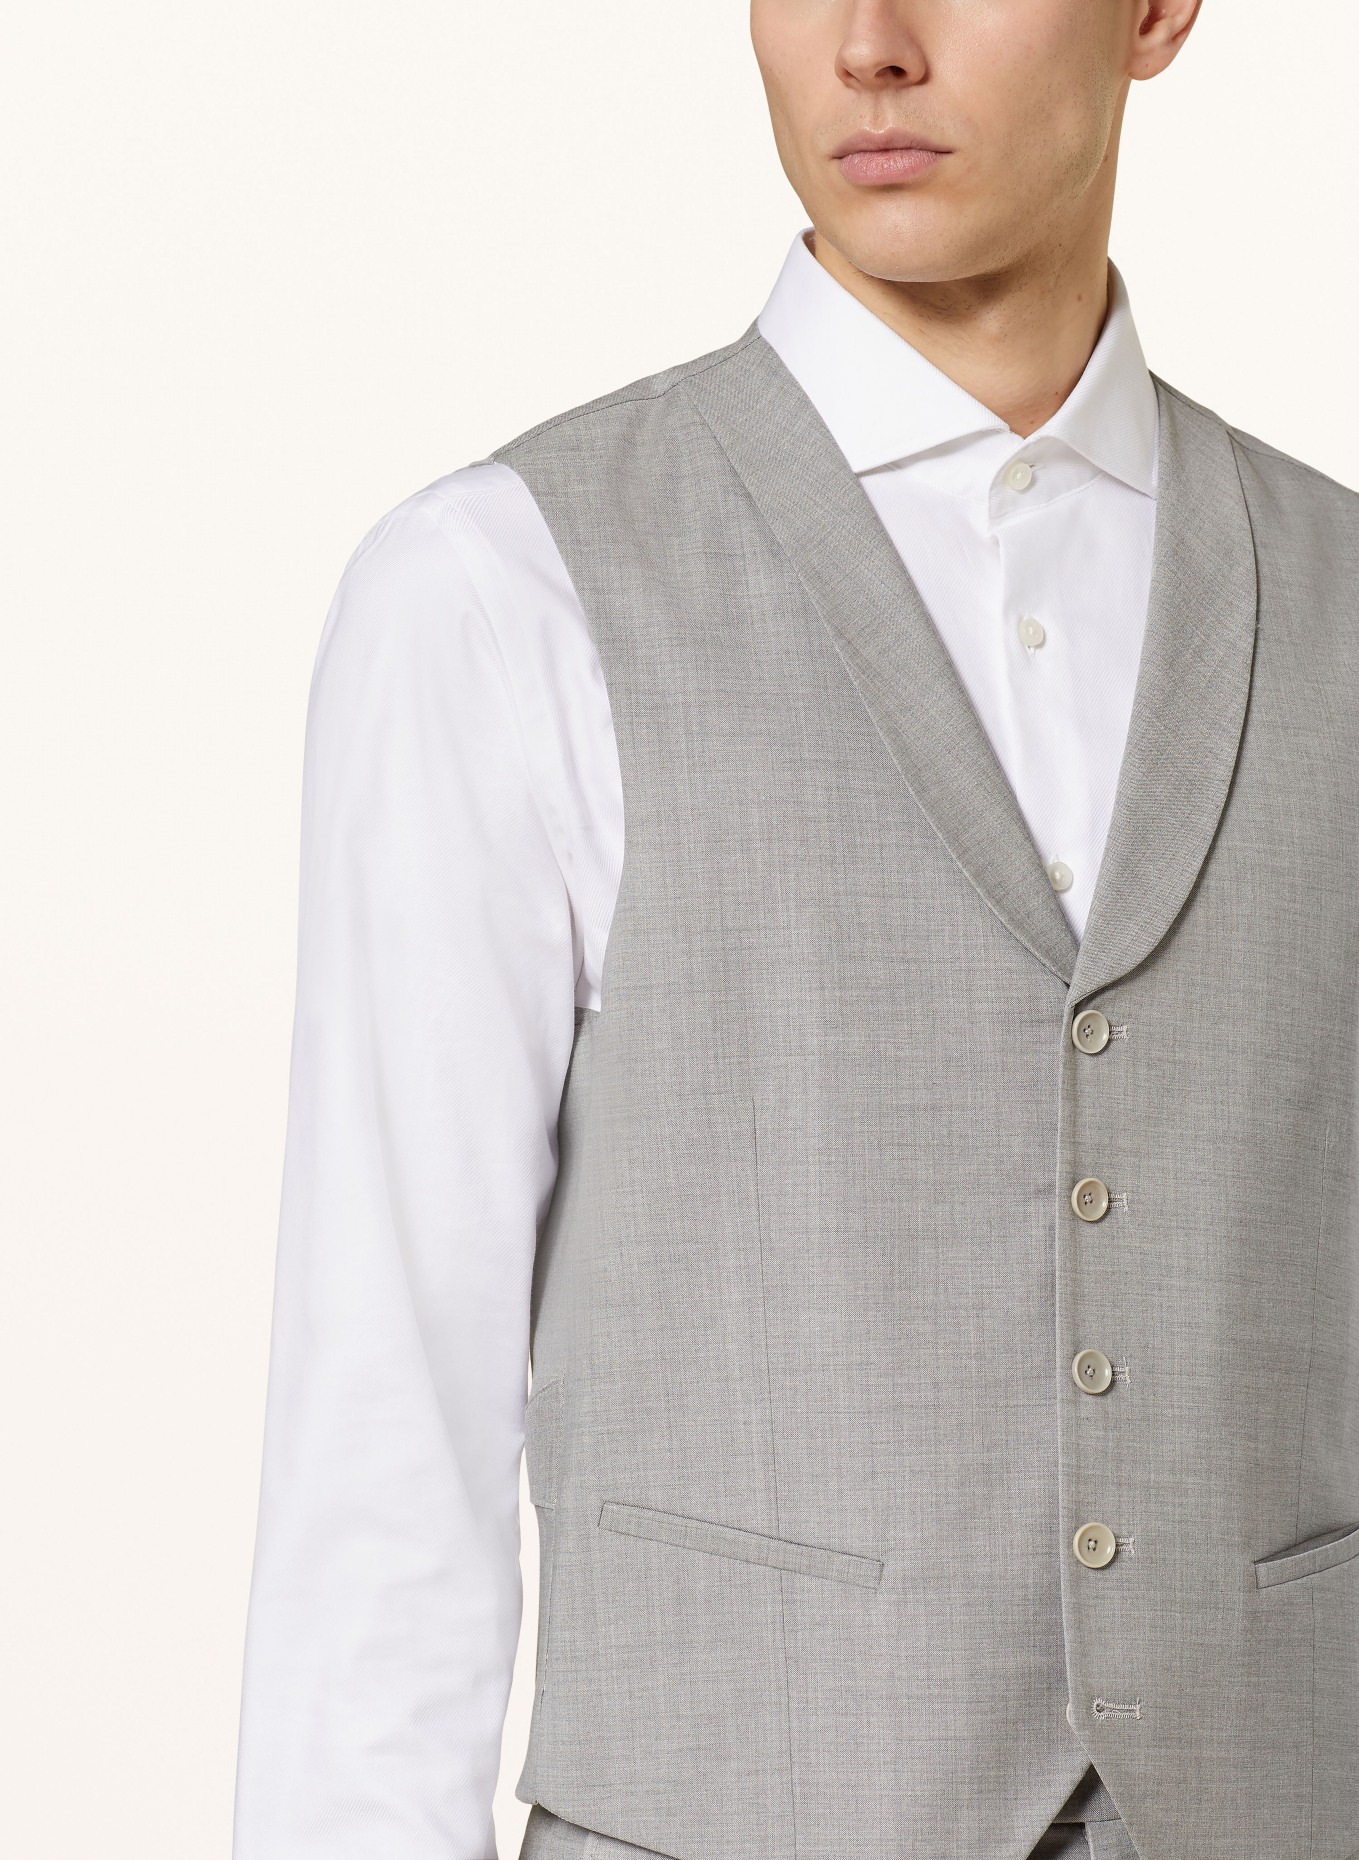 CG - CLUB of GENTS Suit vest CG PADDY extra slim fit, Color: 81 grau hell (Image 5)